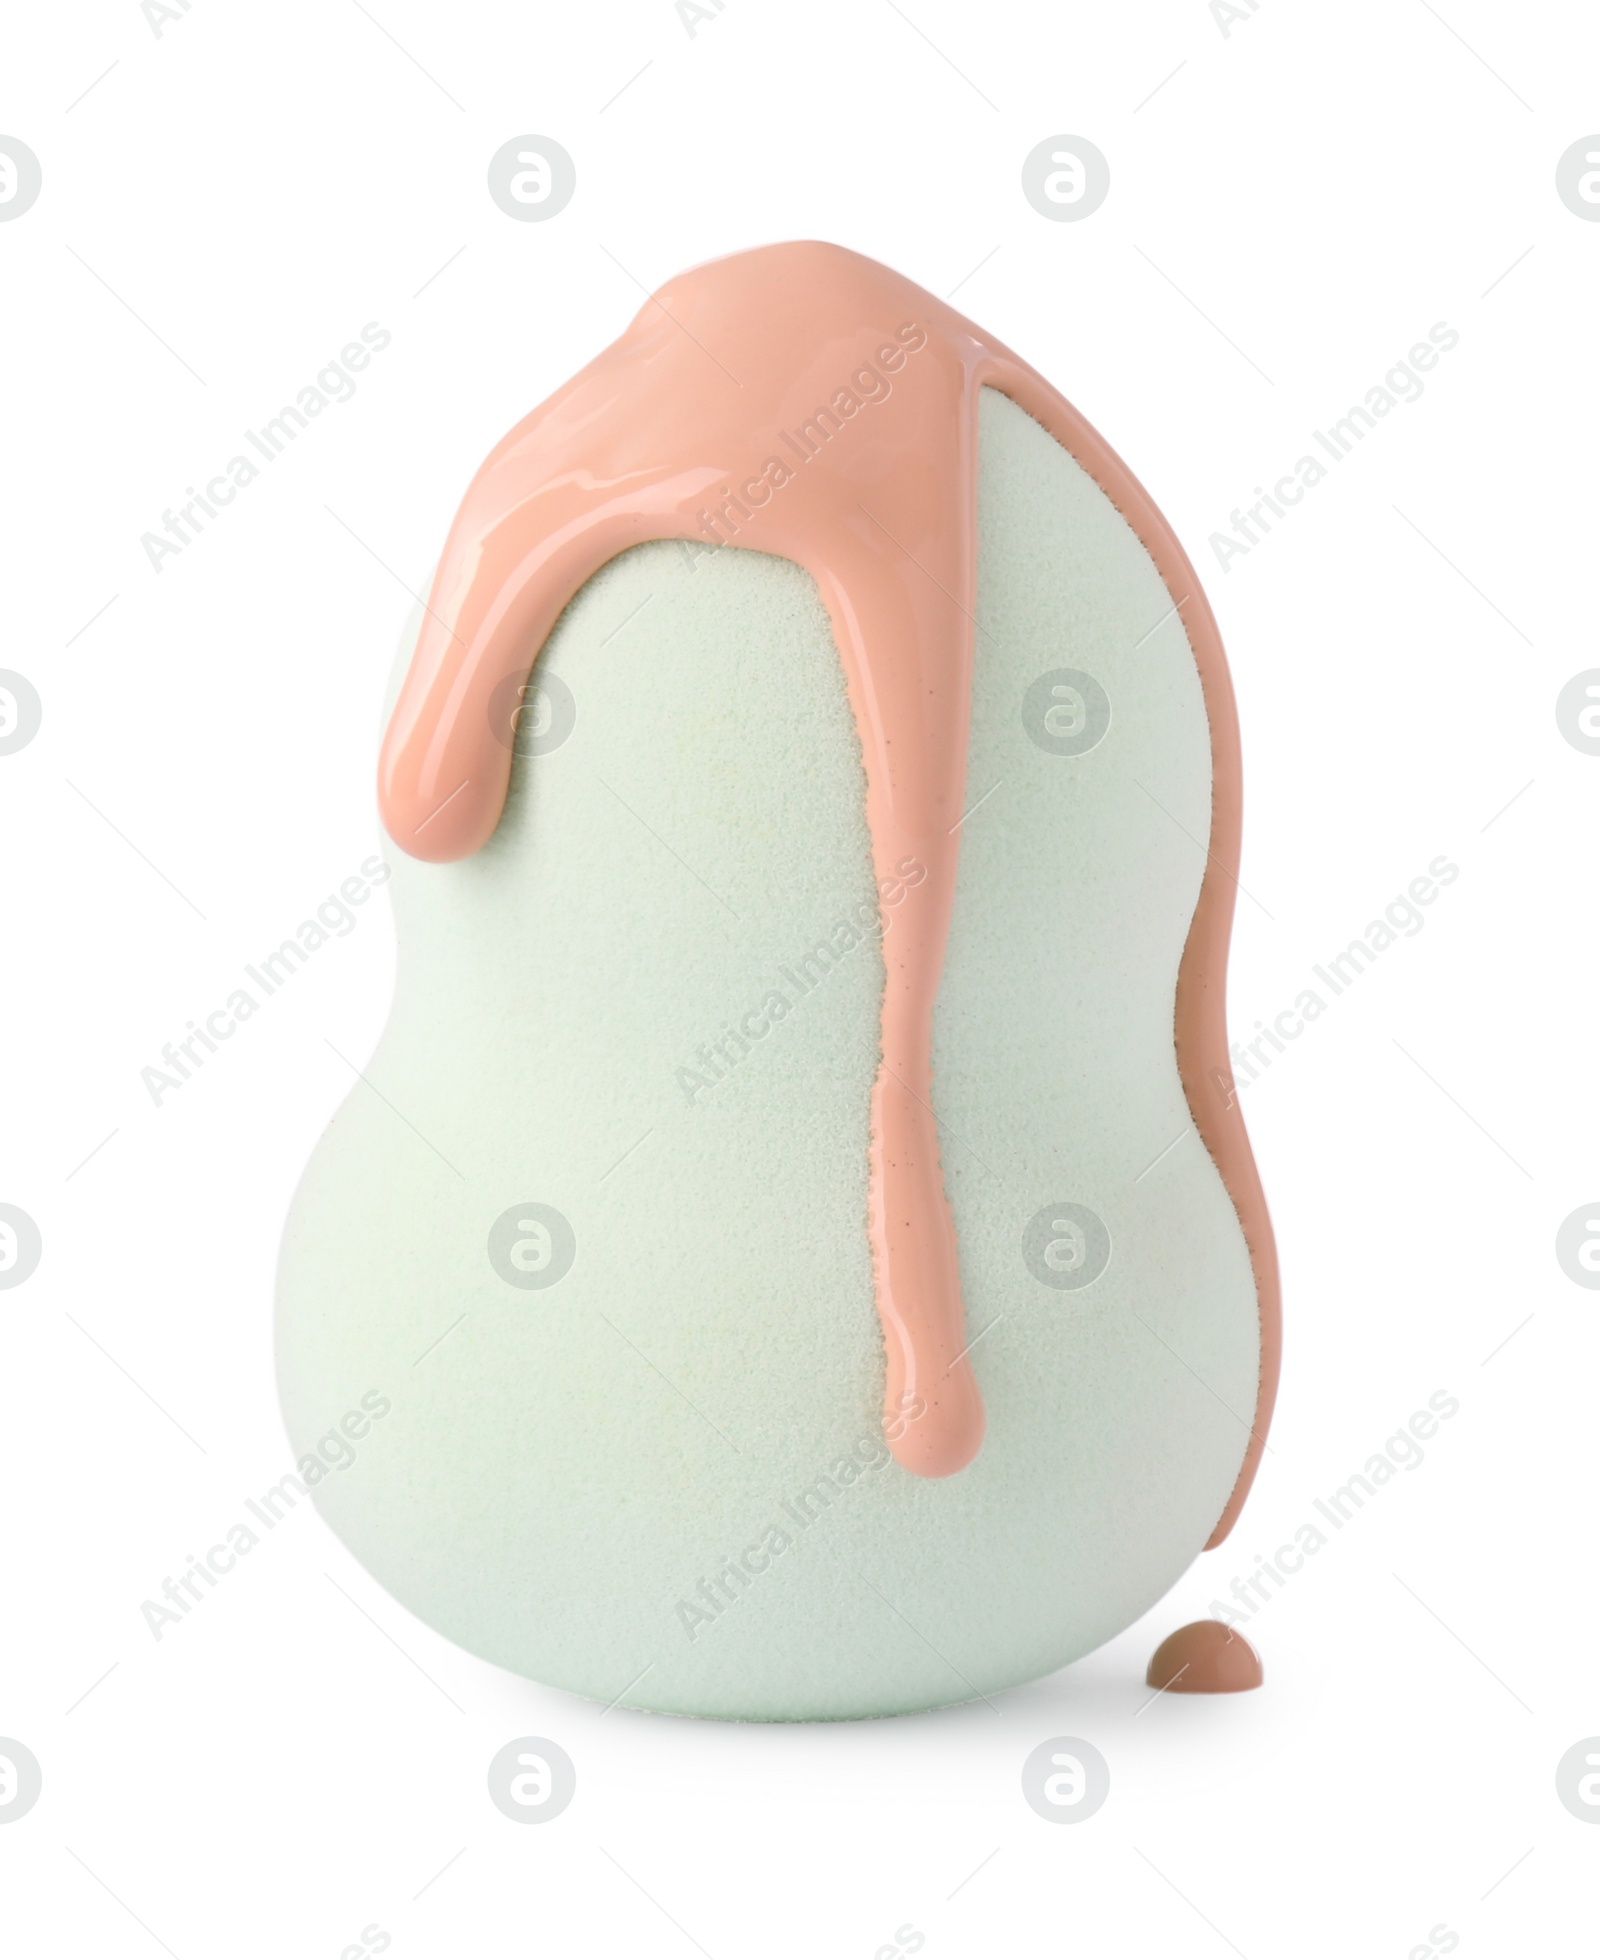 Photo of Makeup sponge with skin foundation isolated on white